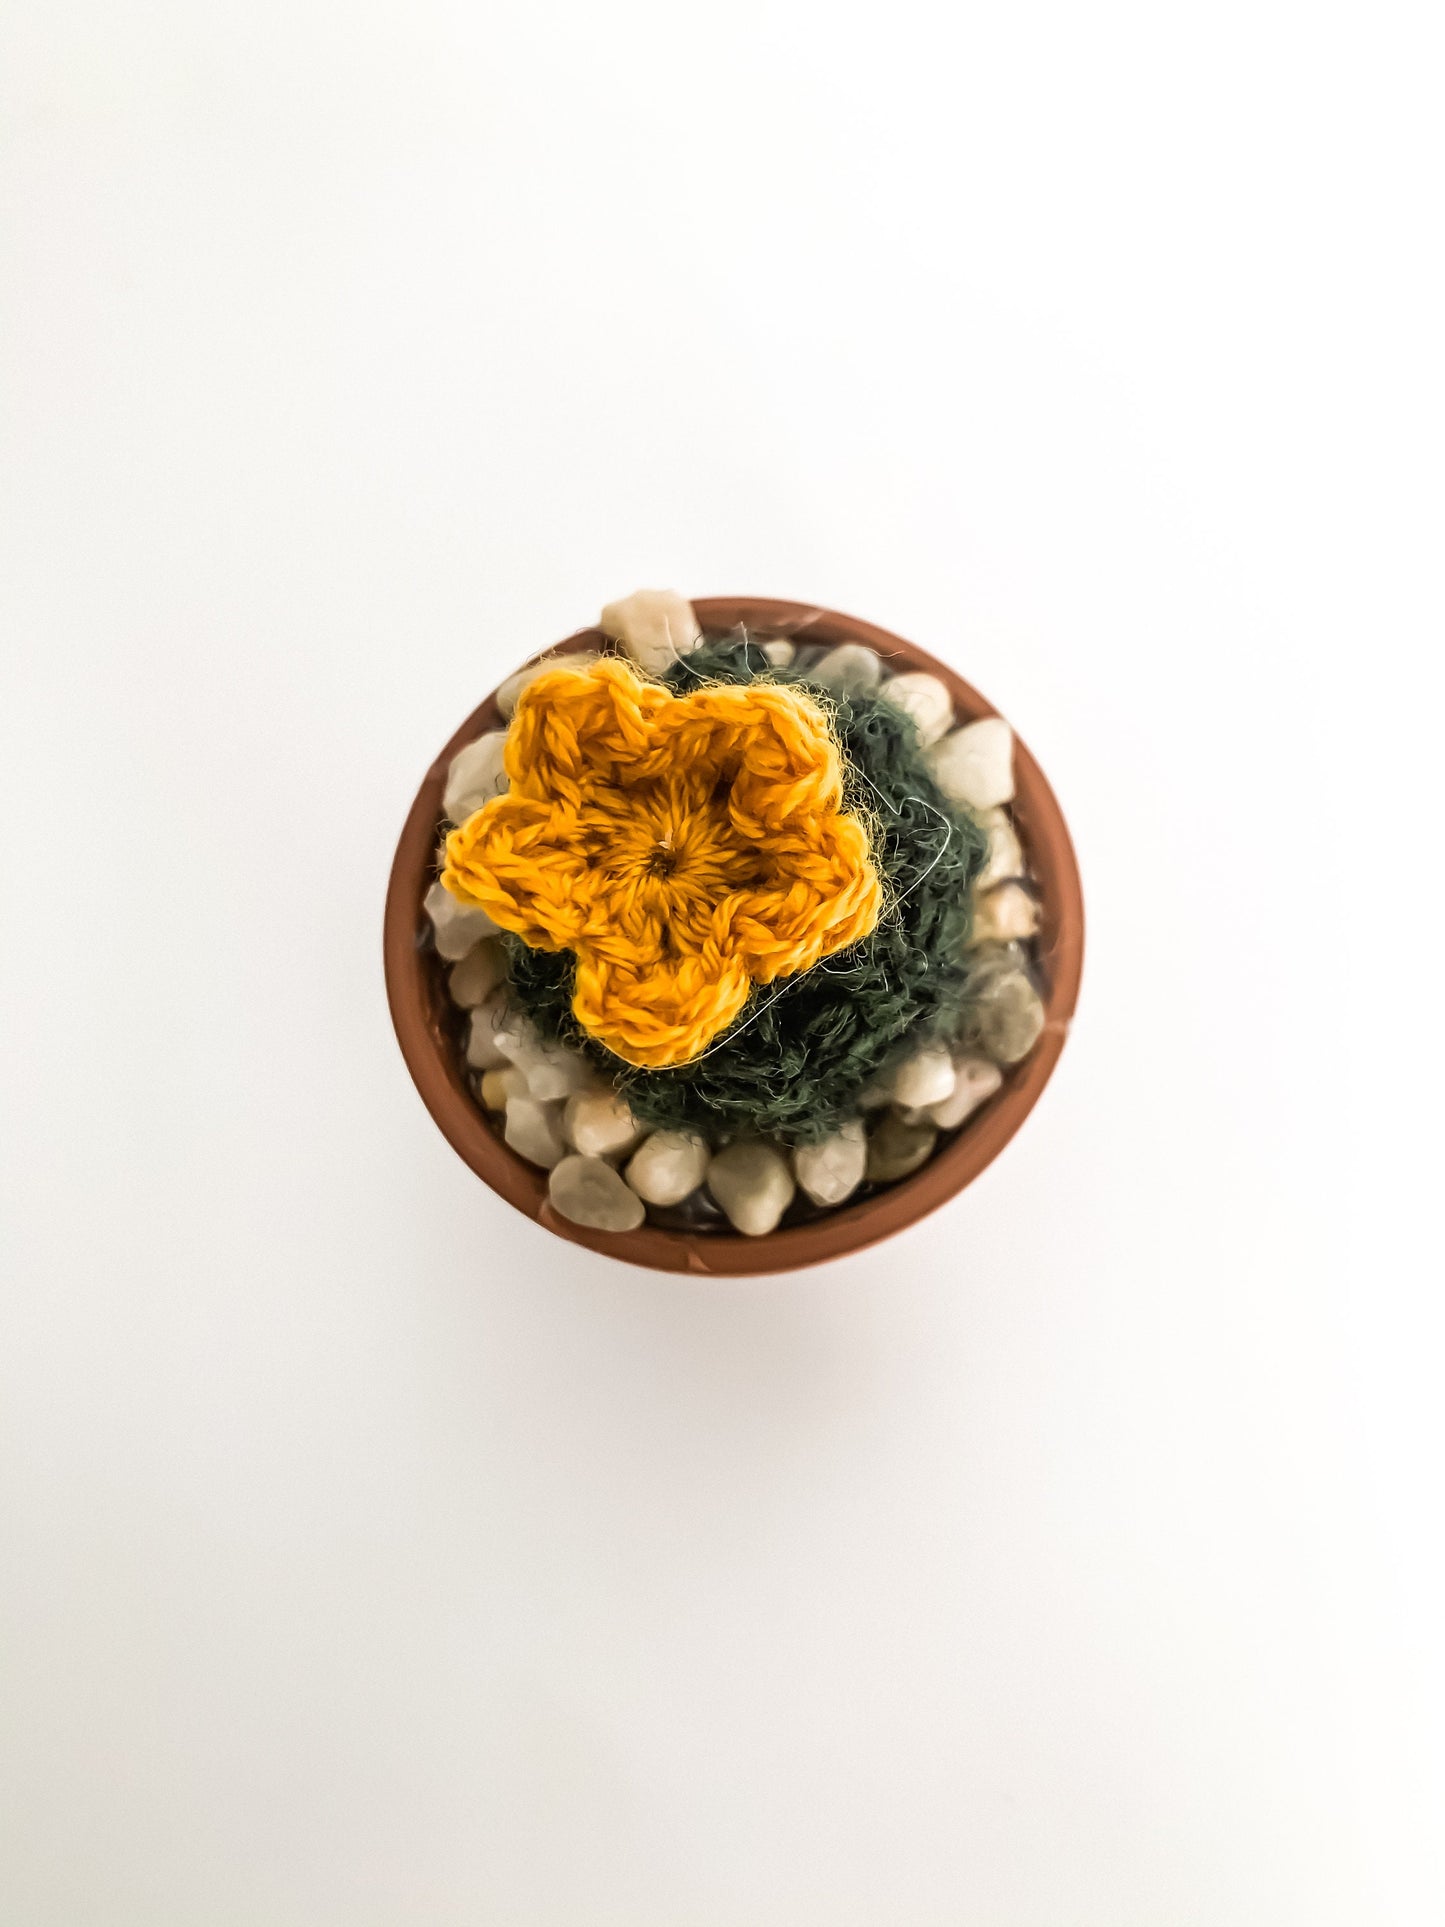 Knit Cactus // Barrel Cactus, Knit Cactus Plant with Yellow Flower Planted in Mini Terracotta Pot // Boho Home Decor // Home Office Decor